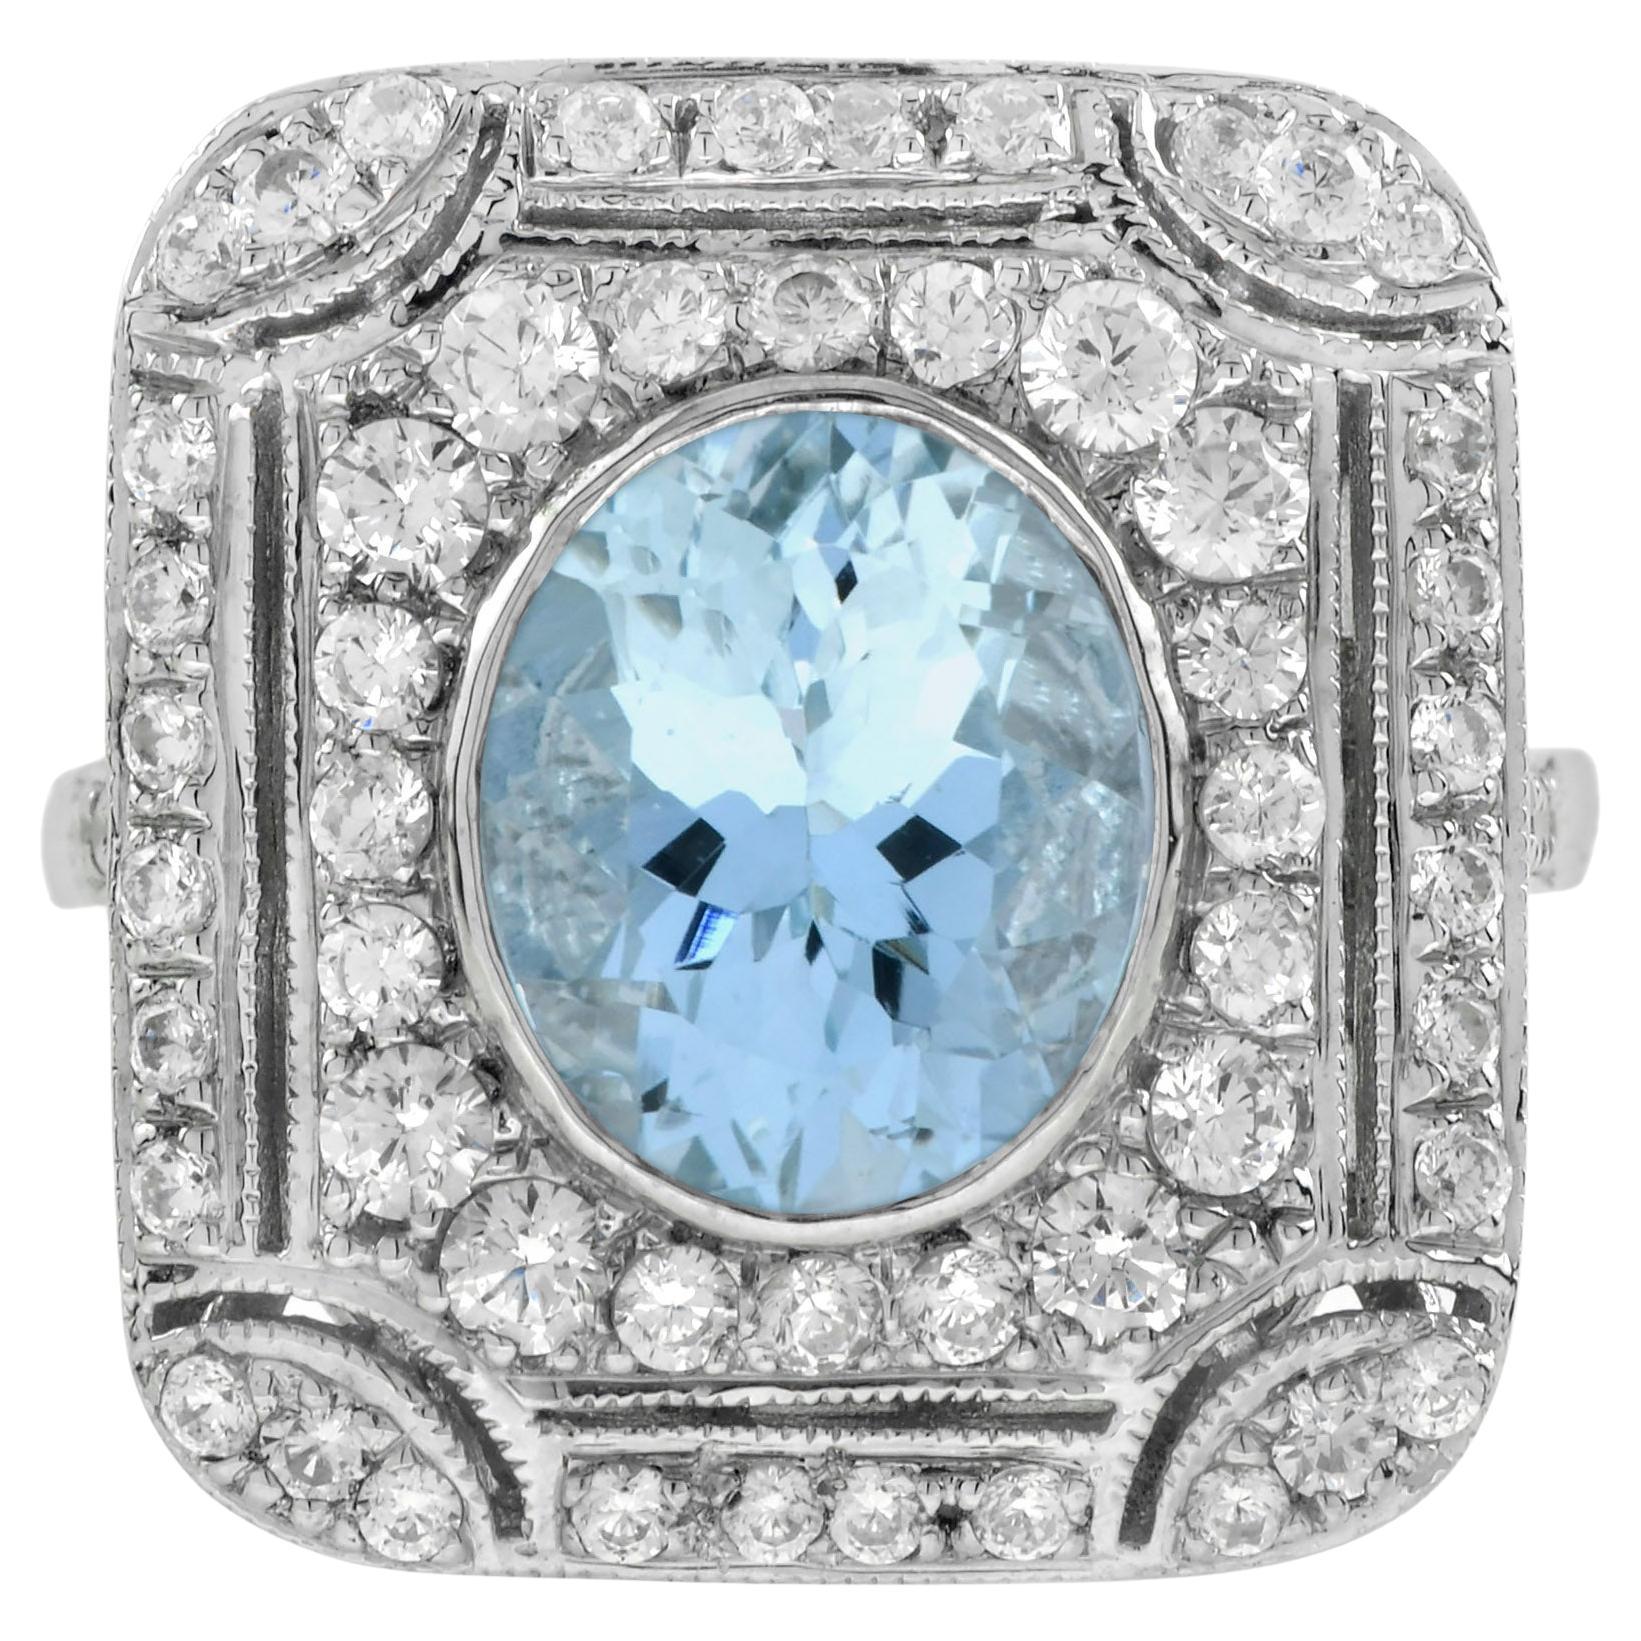 Blue Topaz and Diamond Art Deco Style Cocktail Ring in 18K White Gold